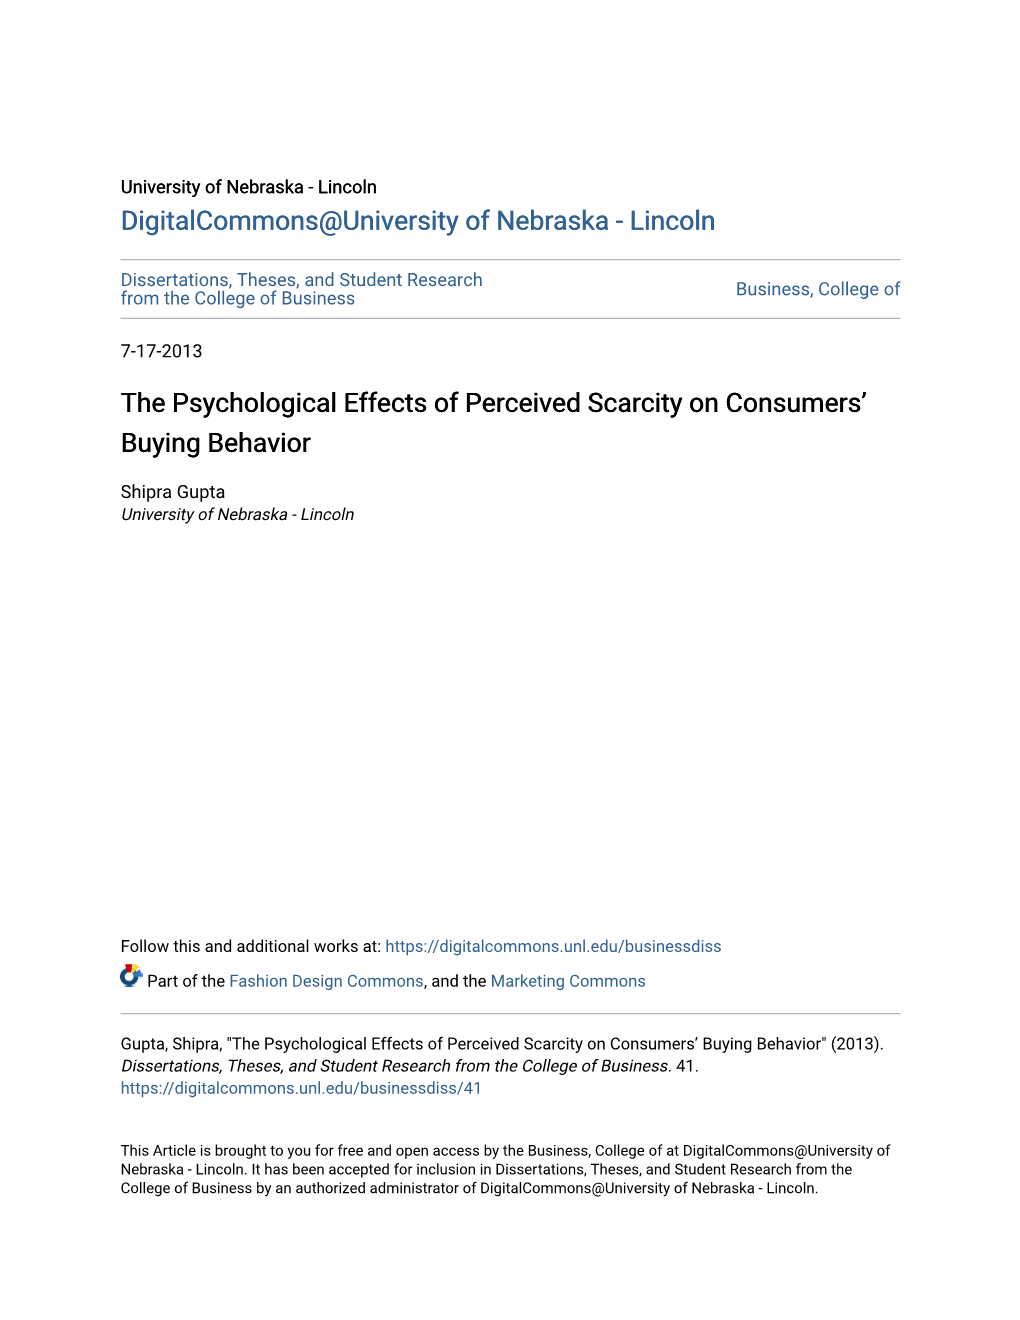 The Psychological Effects of Perceived Scarcity on Consumers’ Buying Behavior